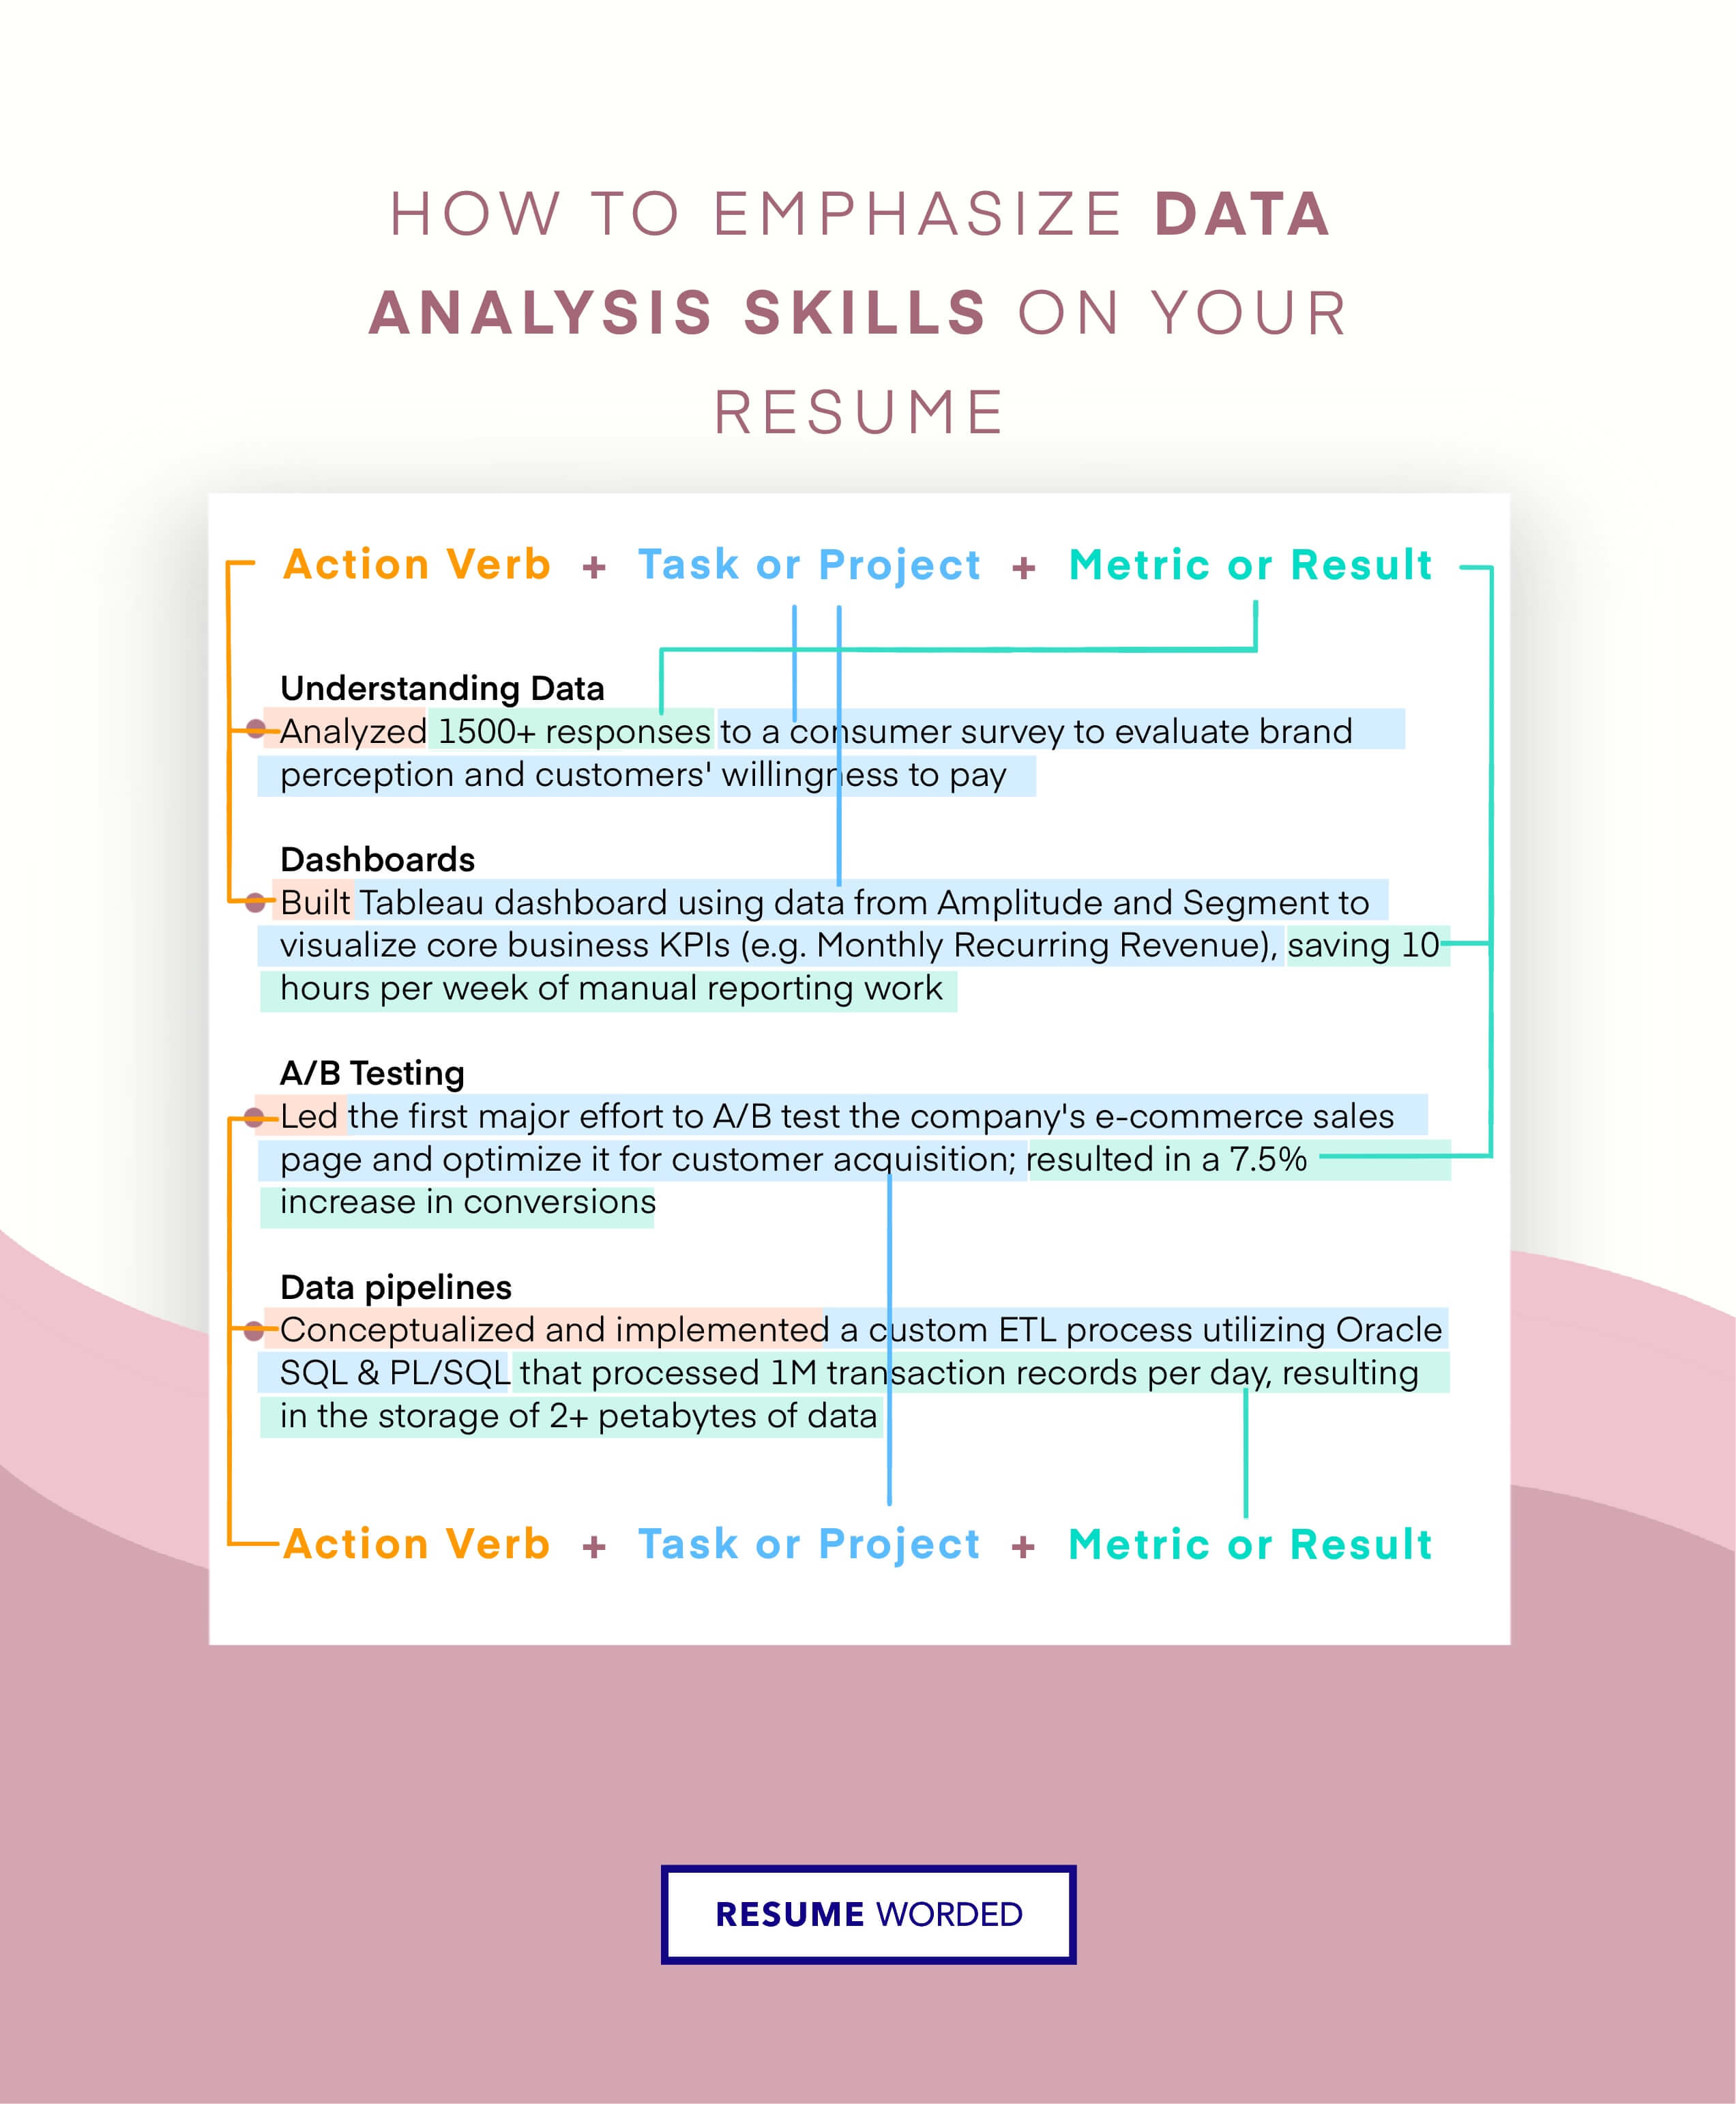 Showcase your data analysis skills - Director of Sales Operations CV